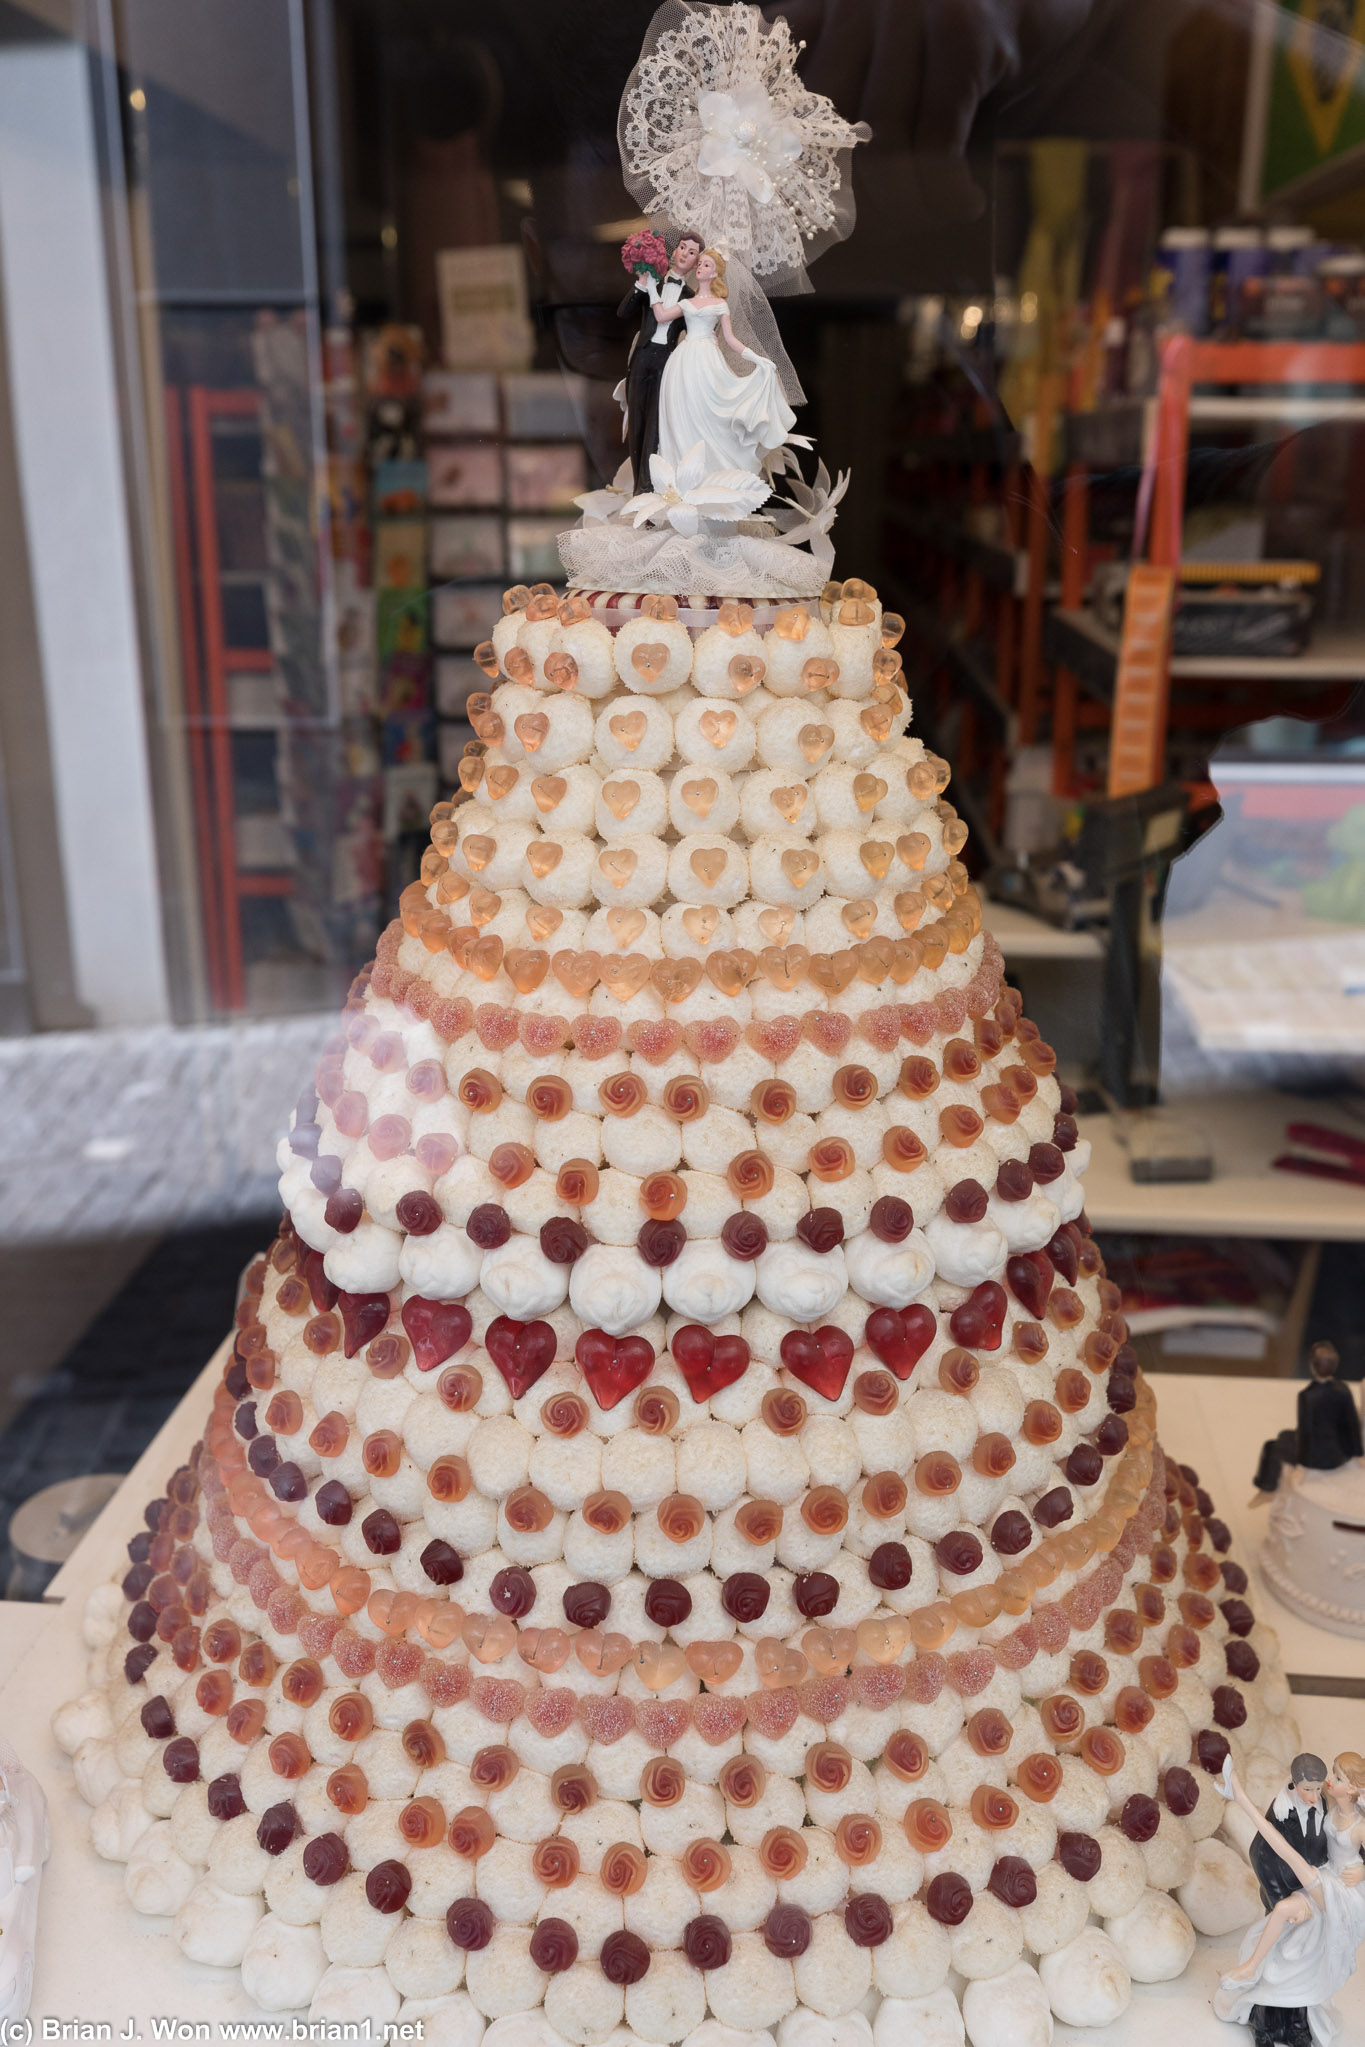 Wedding cake "frosted" in marshmallows? Not sure if amazing or merely genius!